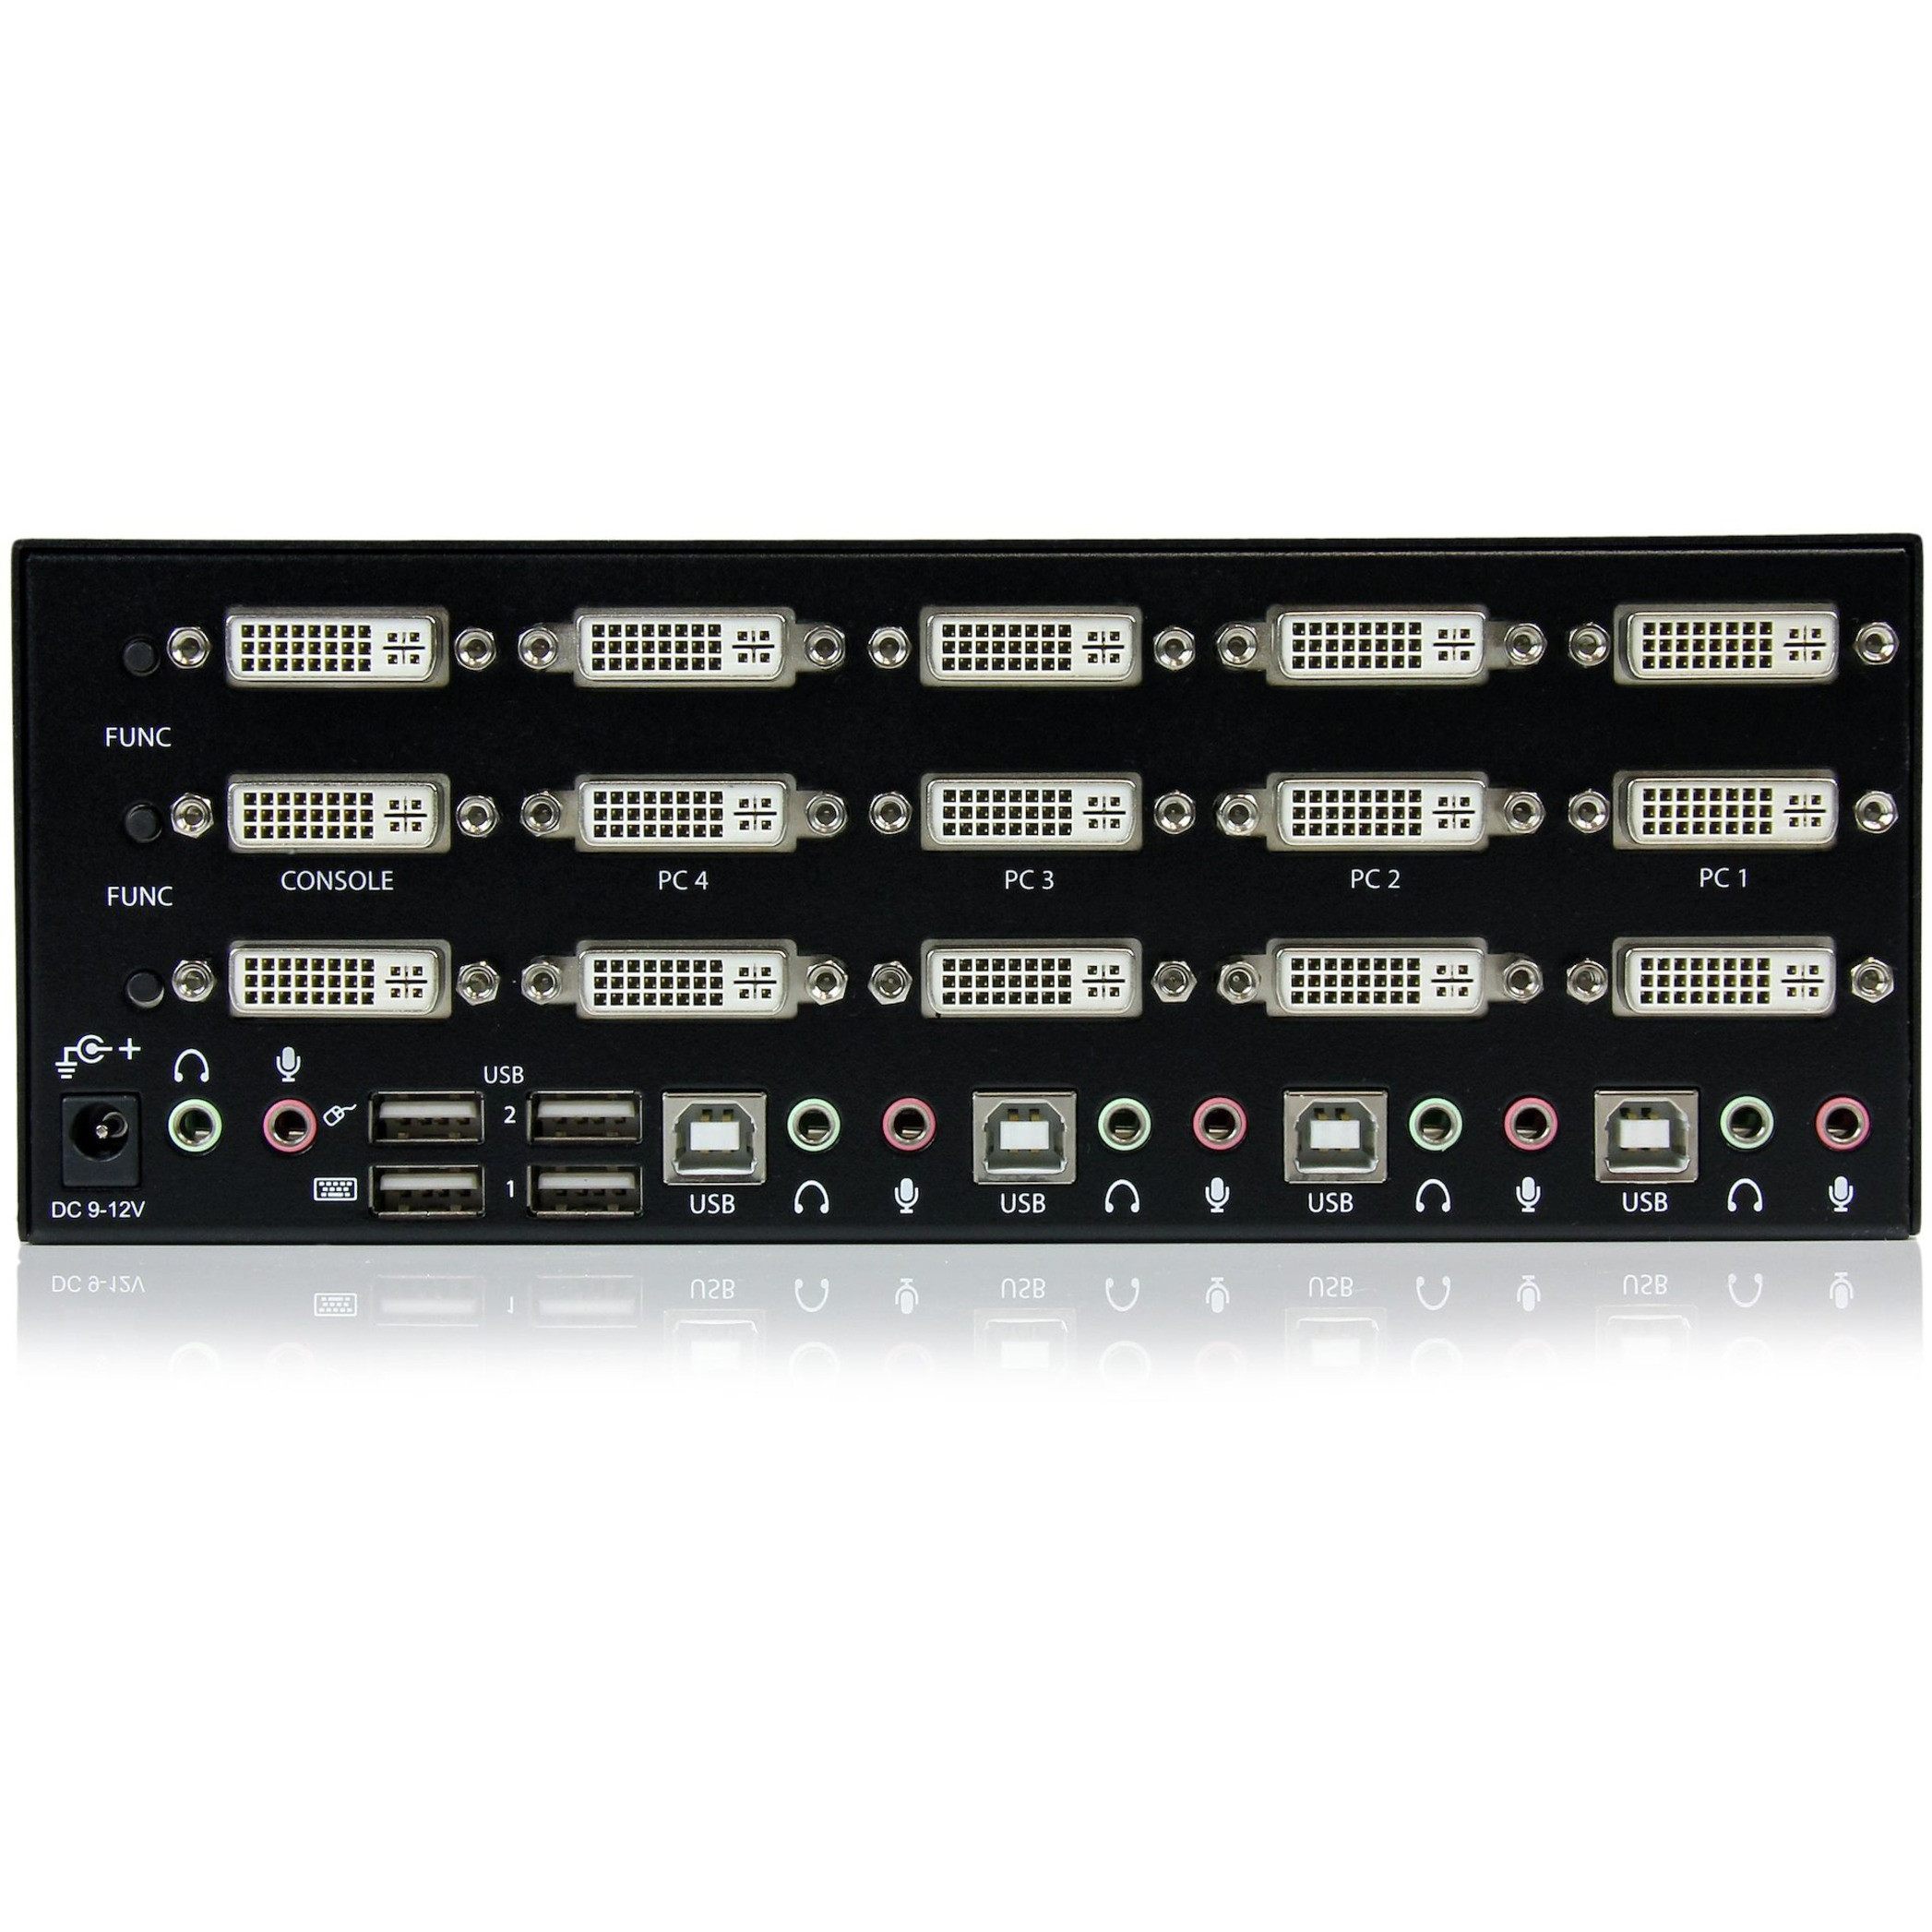 Startech .com 4 Port Triple Monitor DVI USB KVM Switch with Audio & USB 2.0 HubSwitch between four triple head computers, while sharing th… SV431TDVIUA